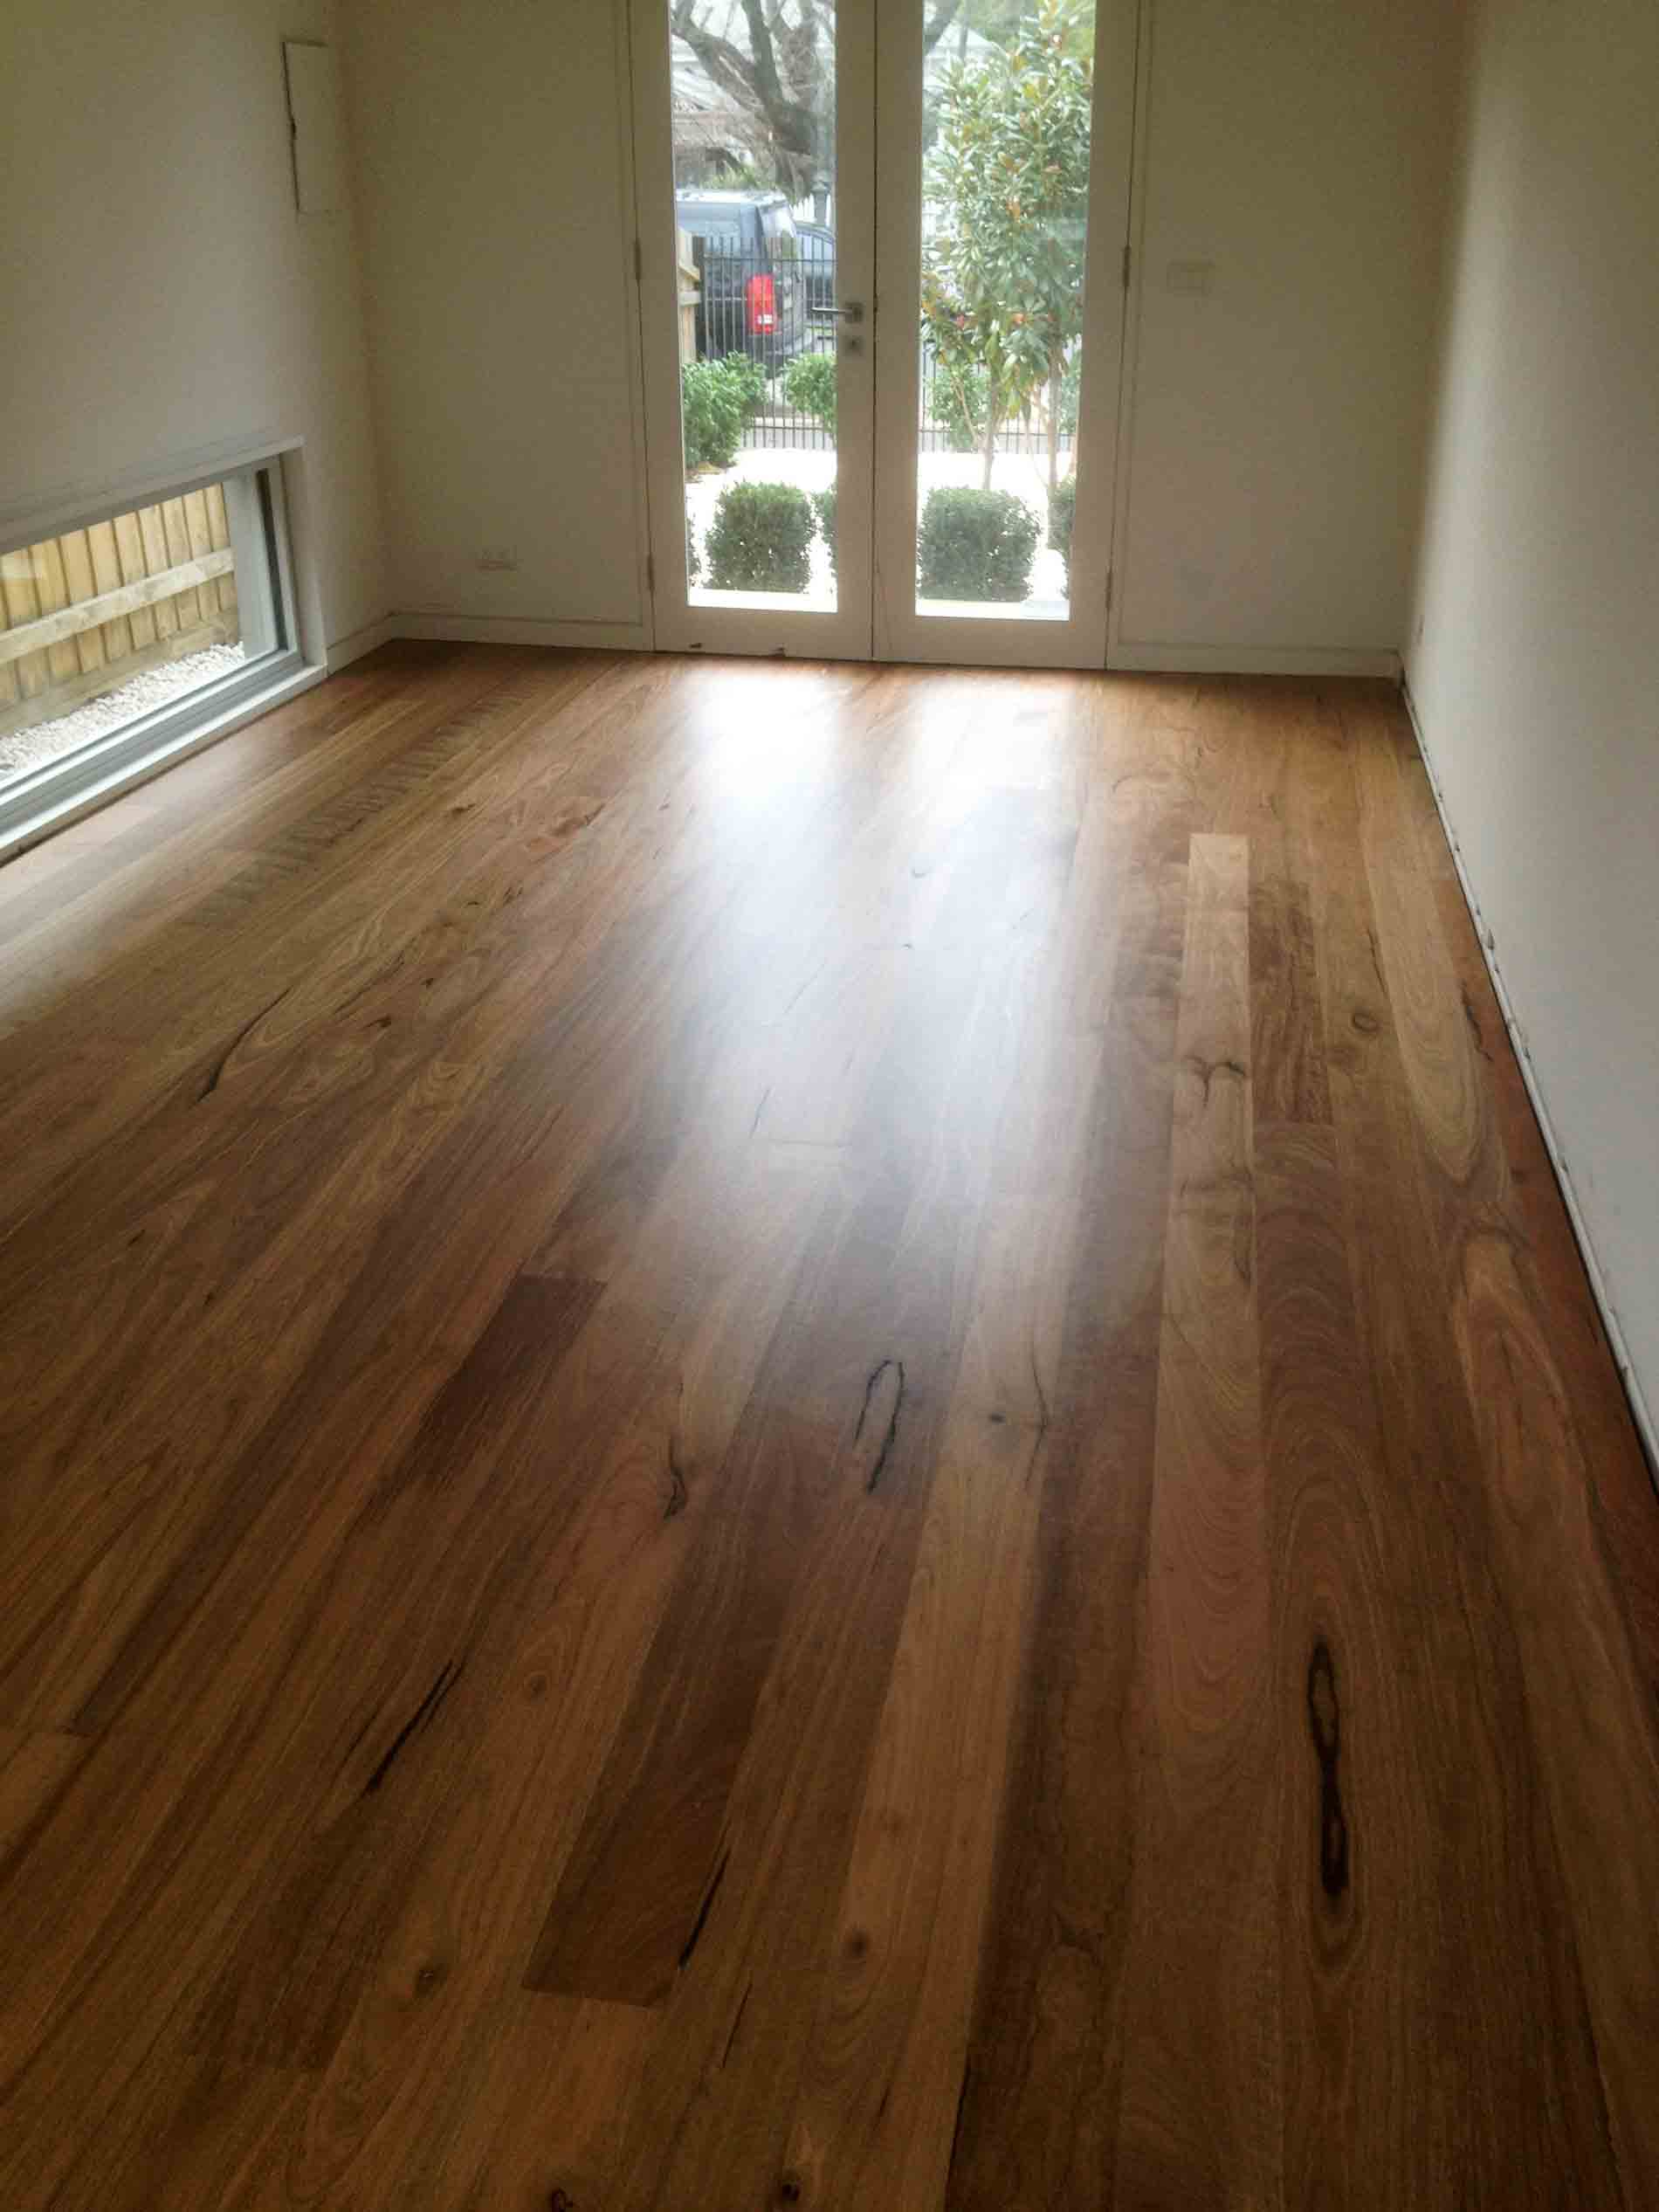 wood floor with a glass door leading to the back yard